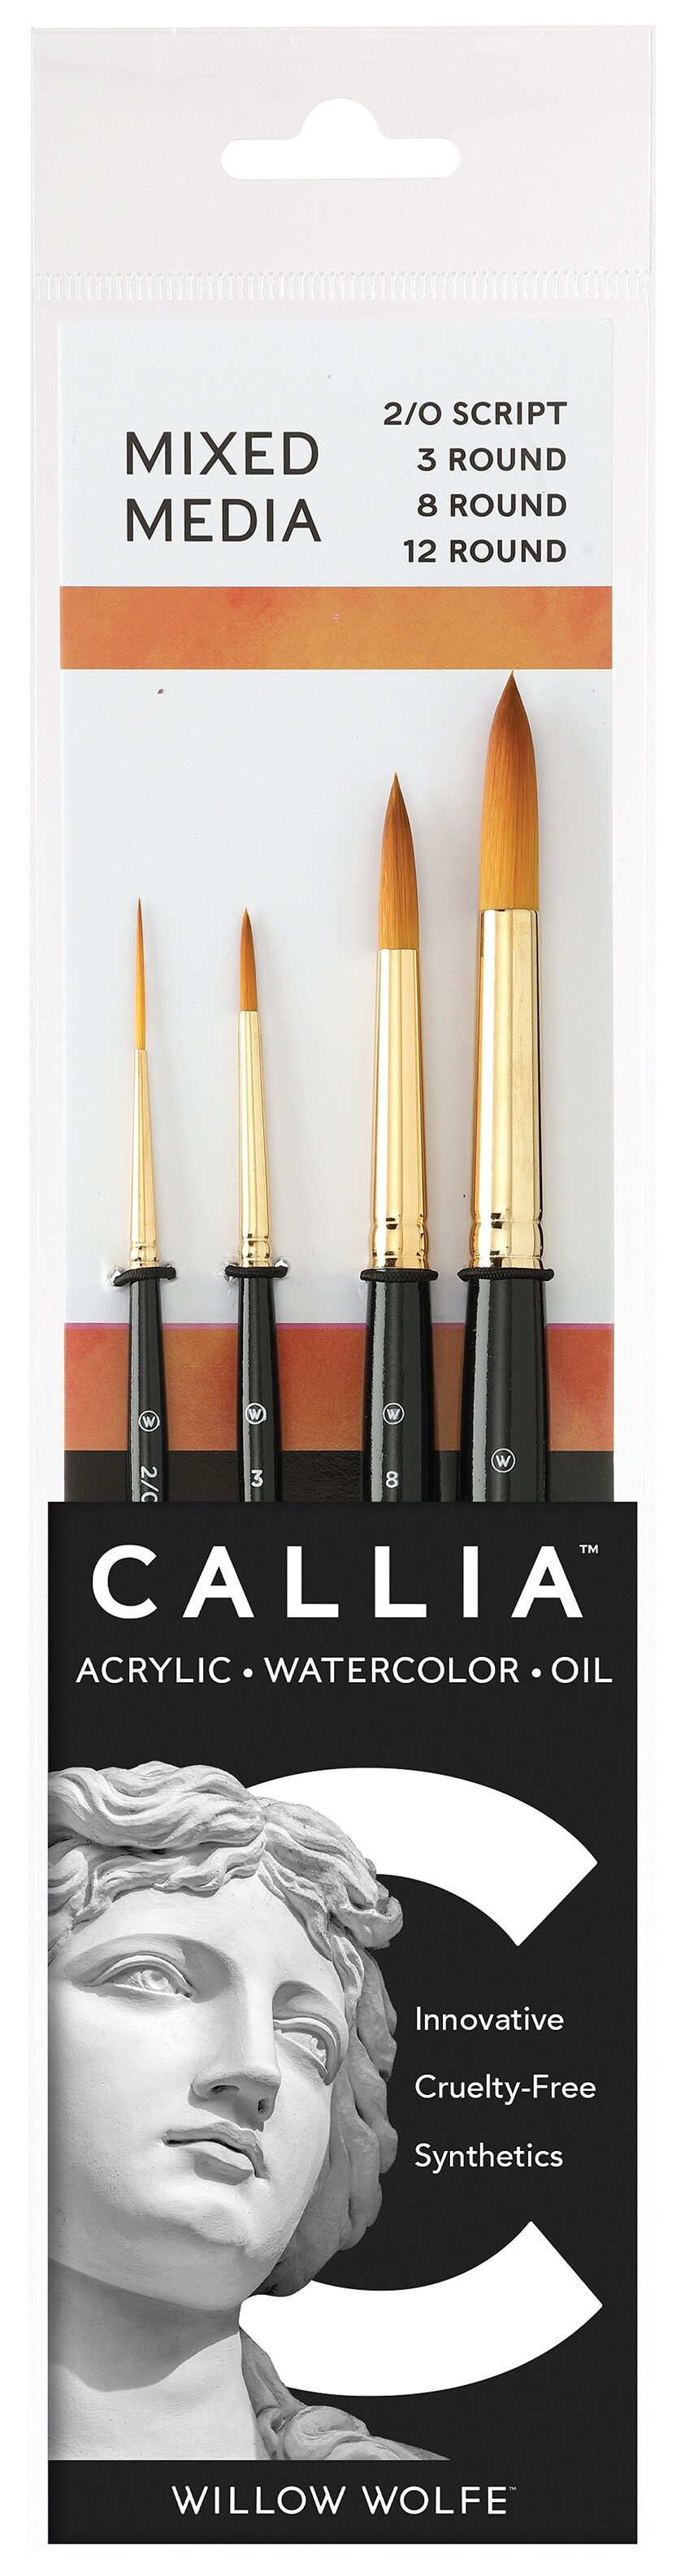 Willow Wolfe Callia Artist Mixed Media Basic Brush Set-Script and Rounds